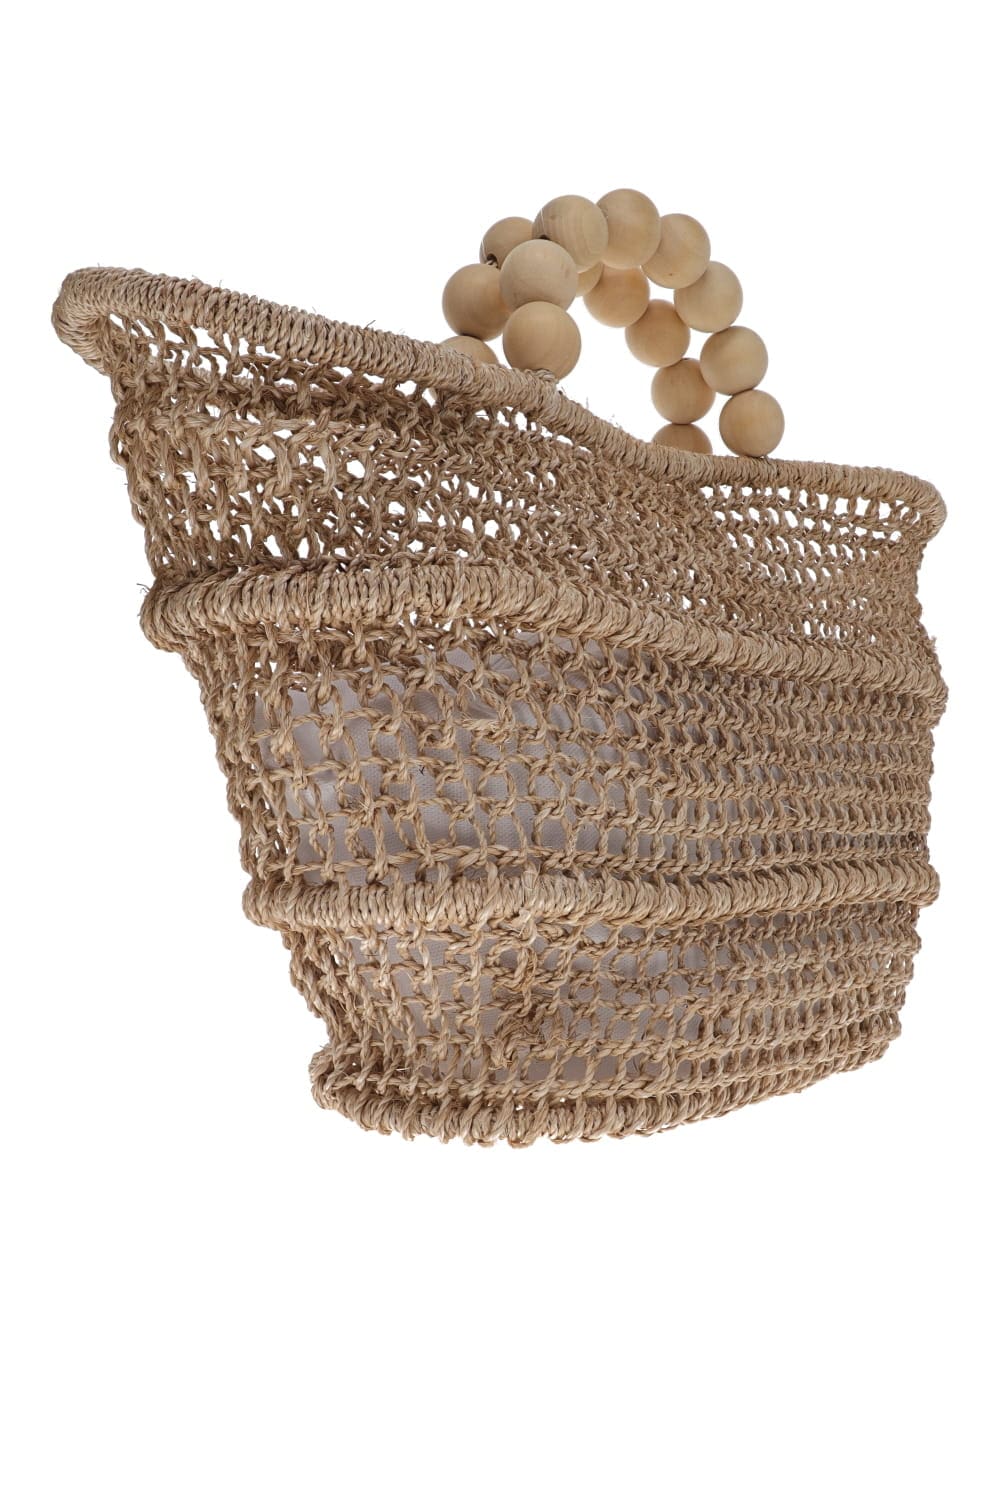 POOLSIDE The Comporta Natural Straw Tote